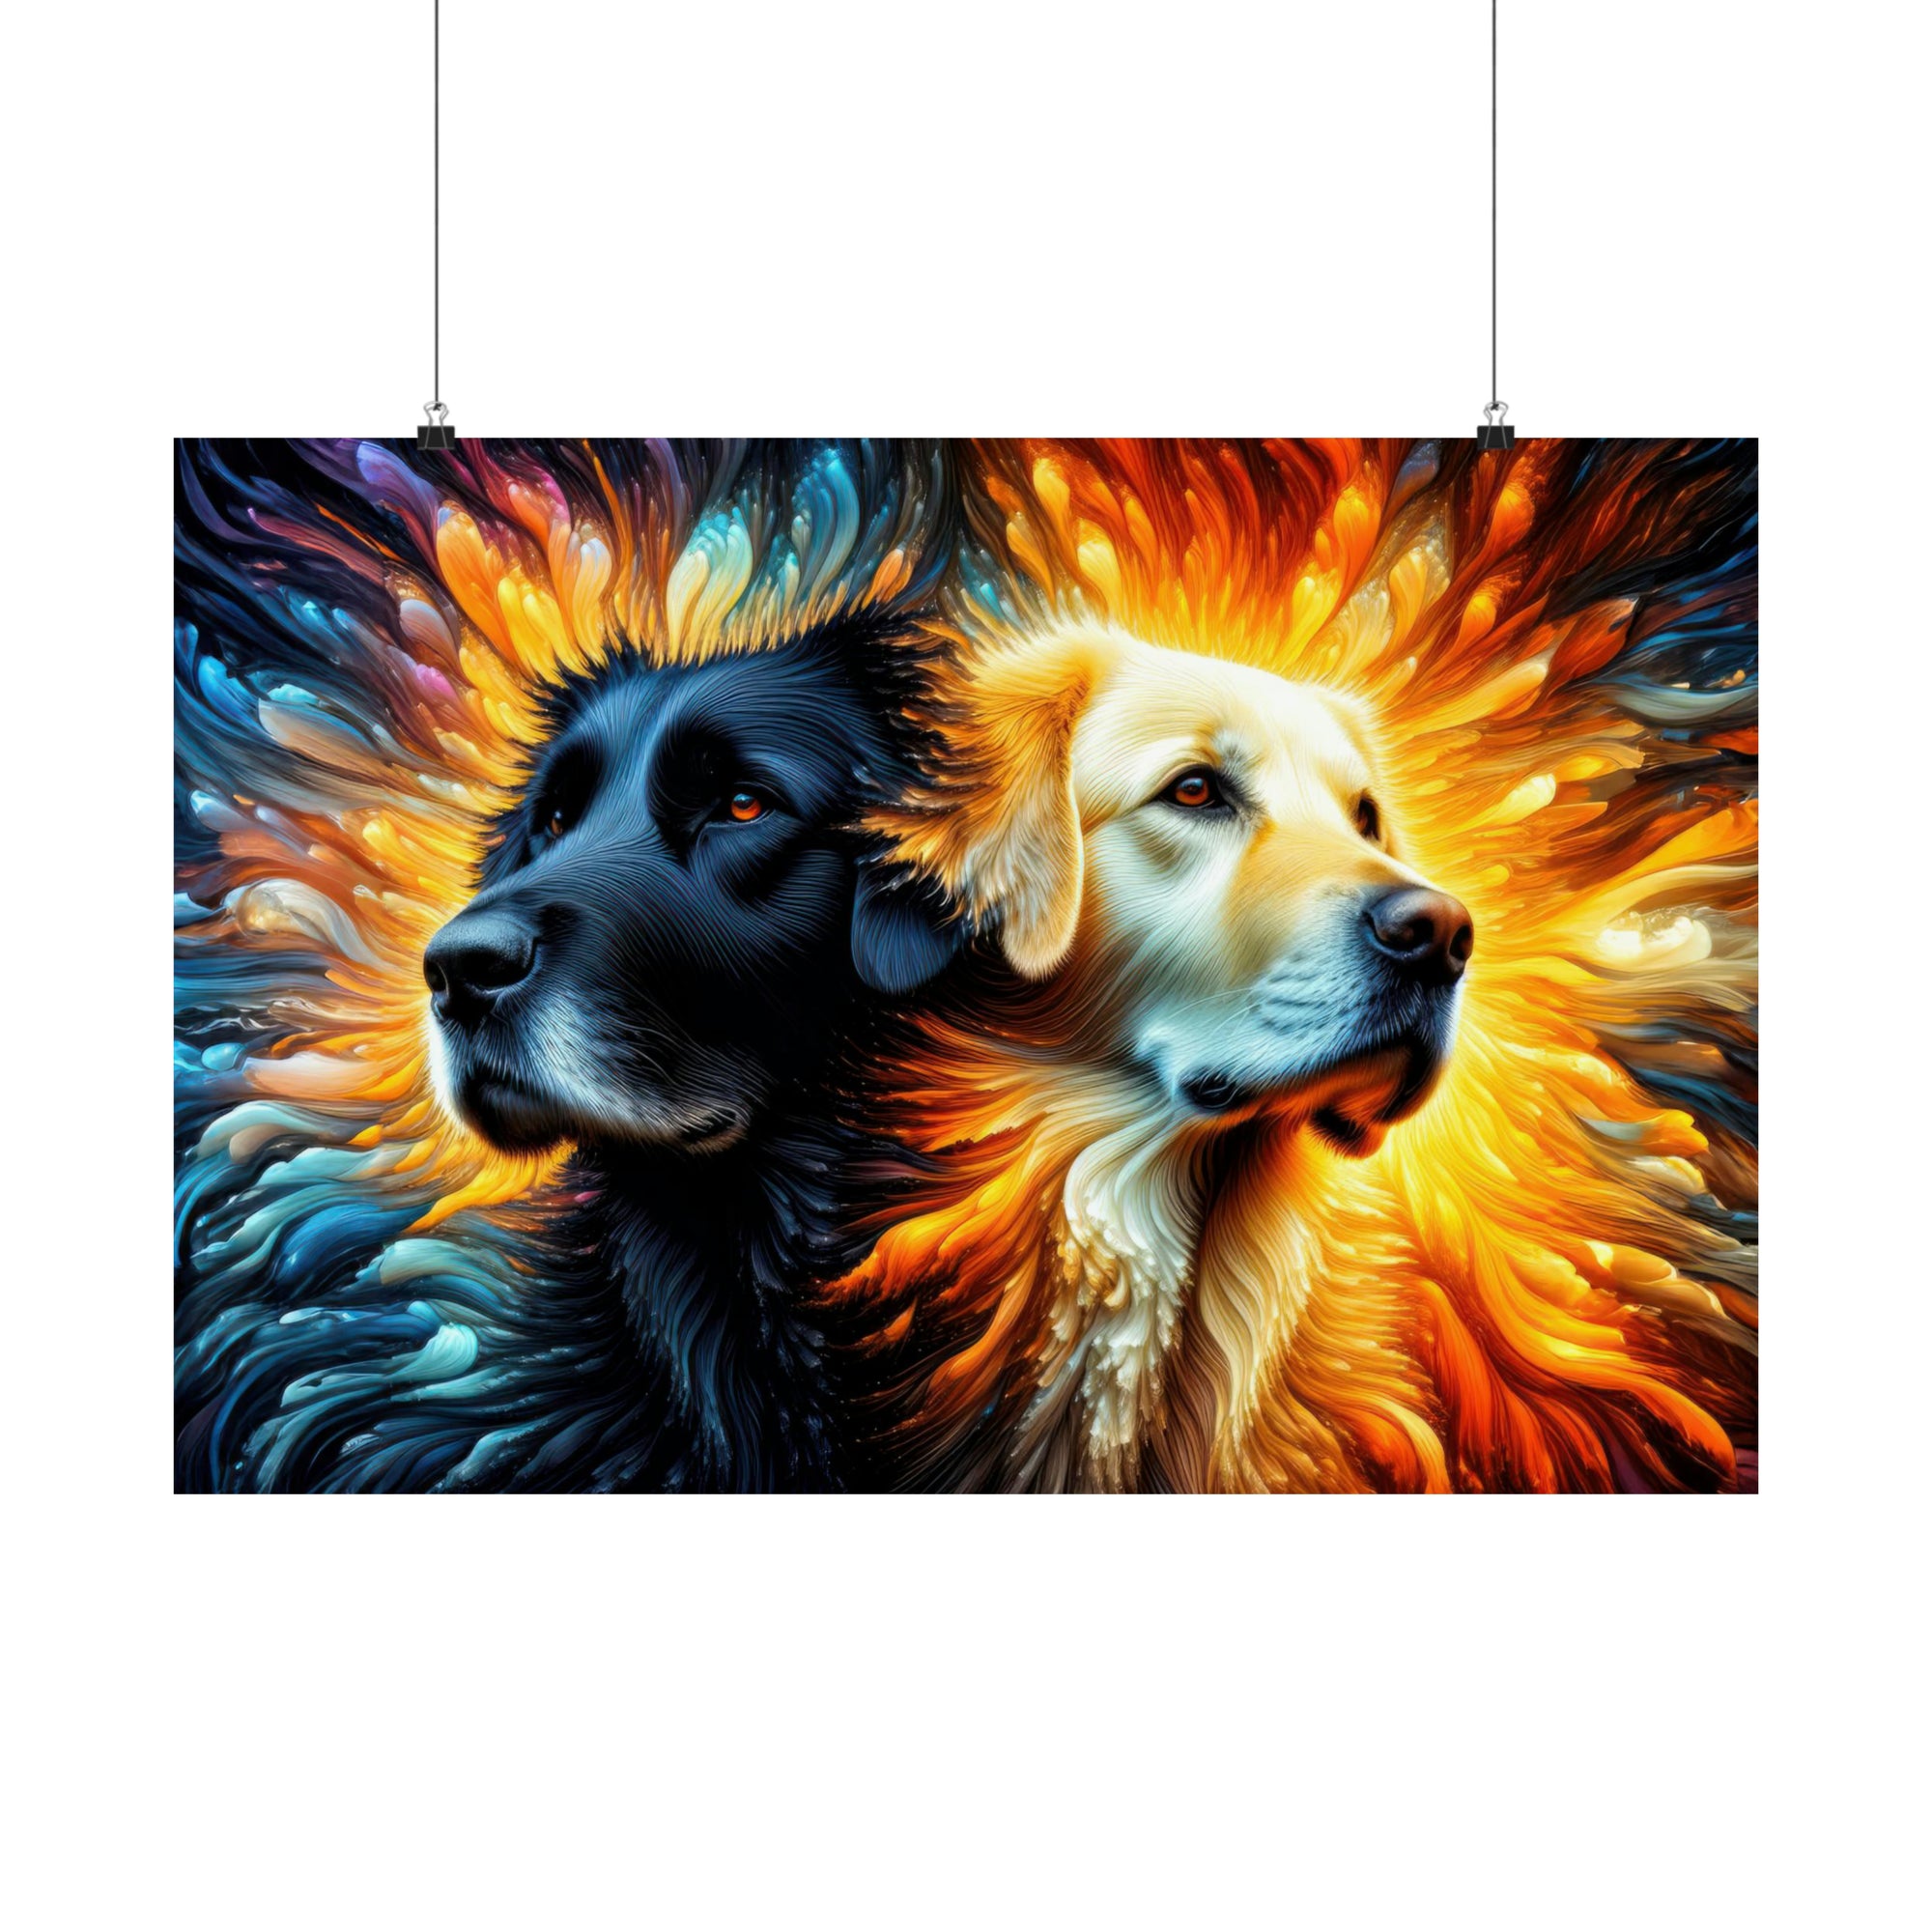 A Canine Duality Poster